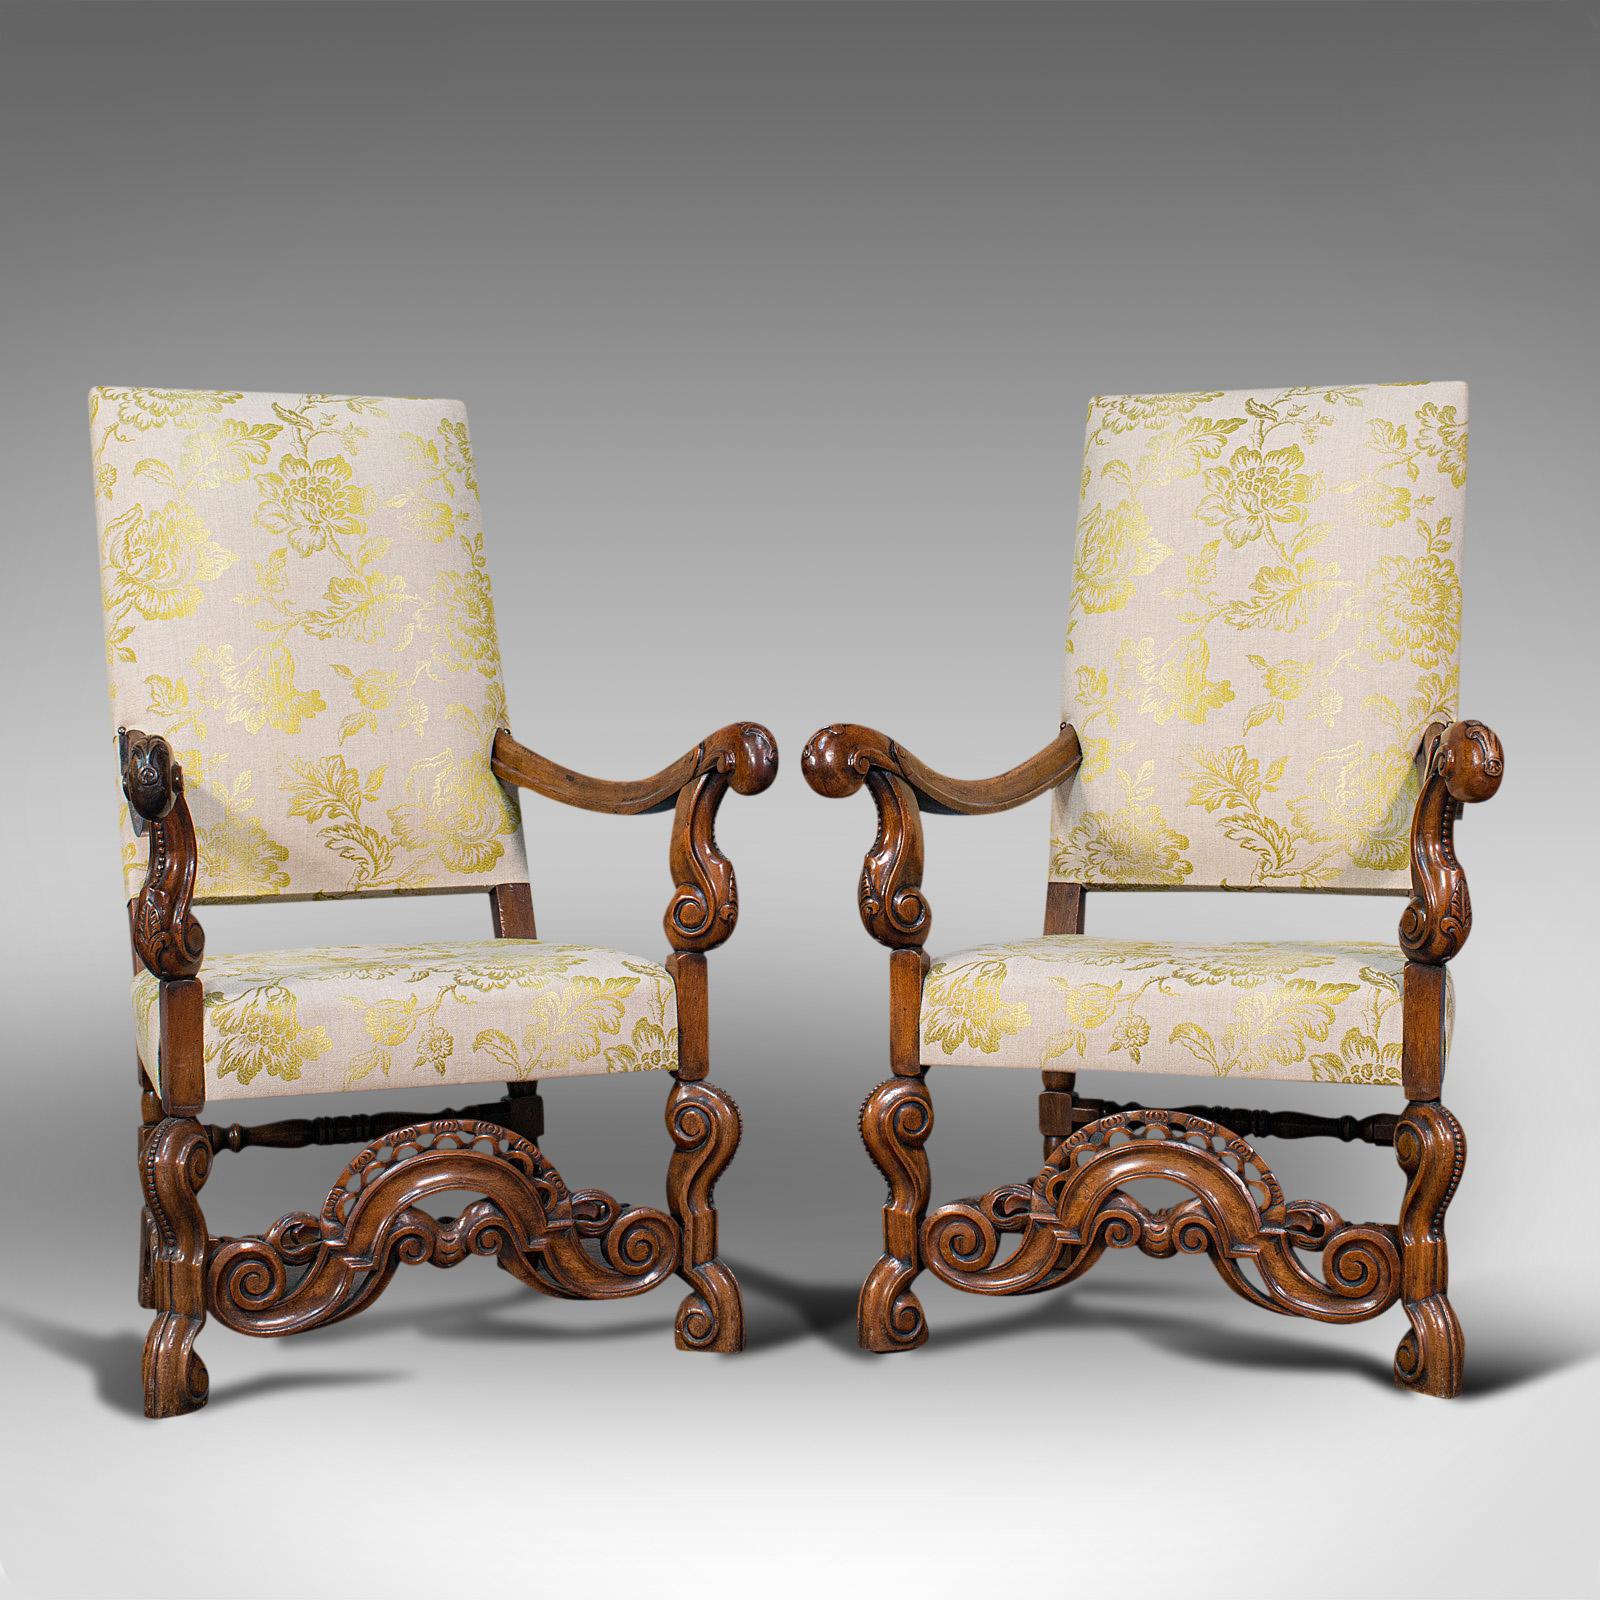 This is a superb pair of antique drawing room elbow chairs. An English, walnut armchair or lounge seat, dating to the late Georgian period, circa 1820.

Carved elbow chairs of exquisite quality and finish
Displaying a desirable aged patina and in